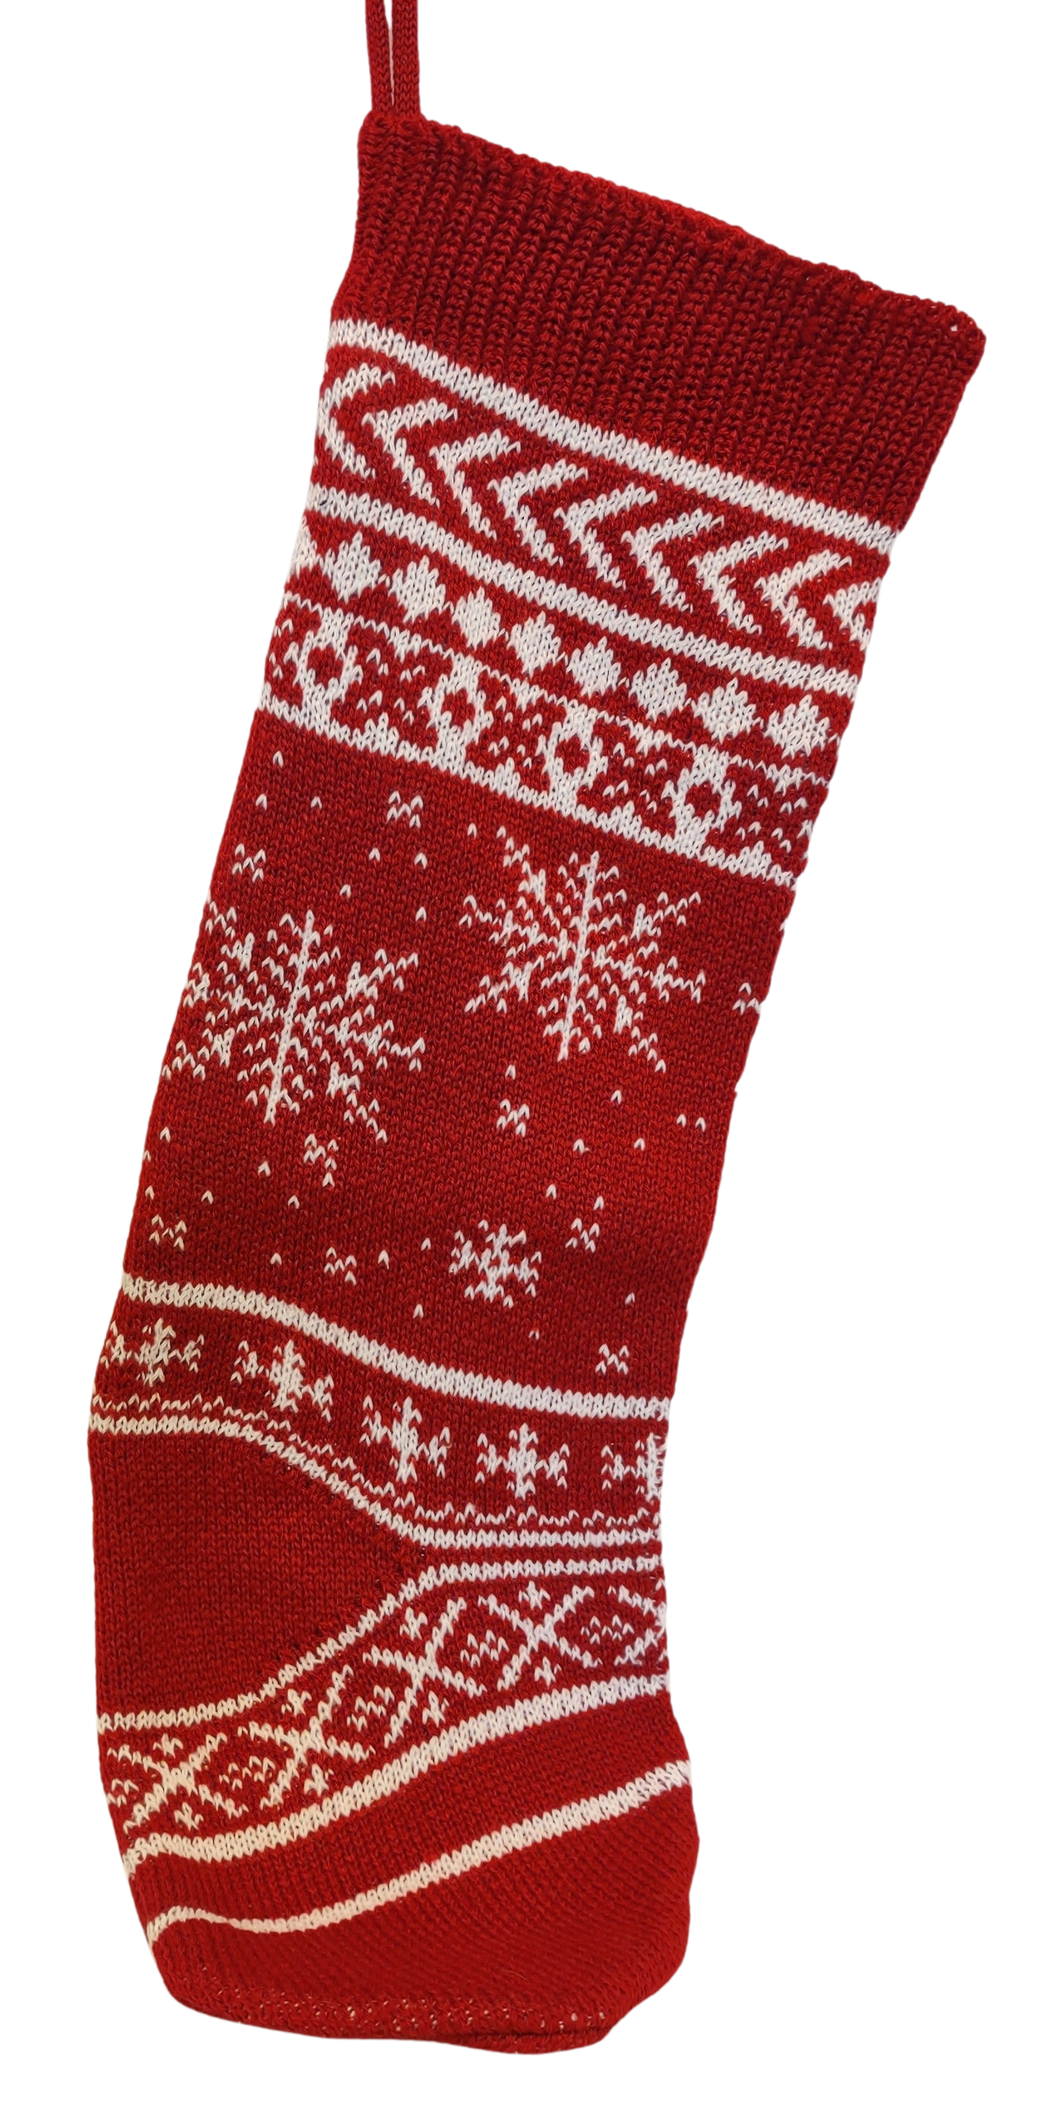 Red/White Knitted Stocking with Snowflakes 18